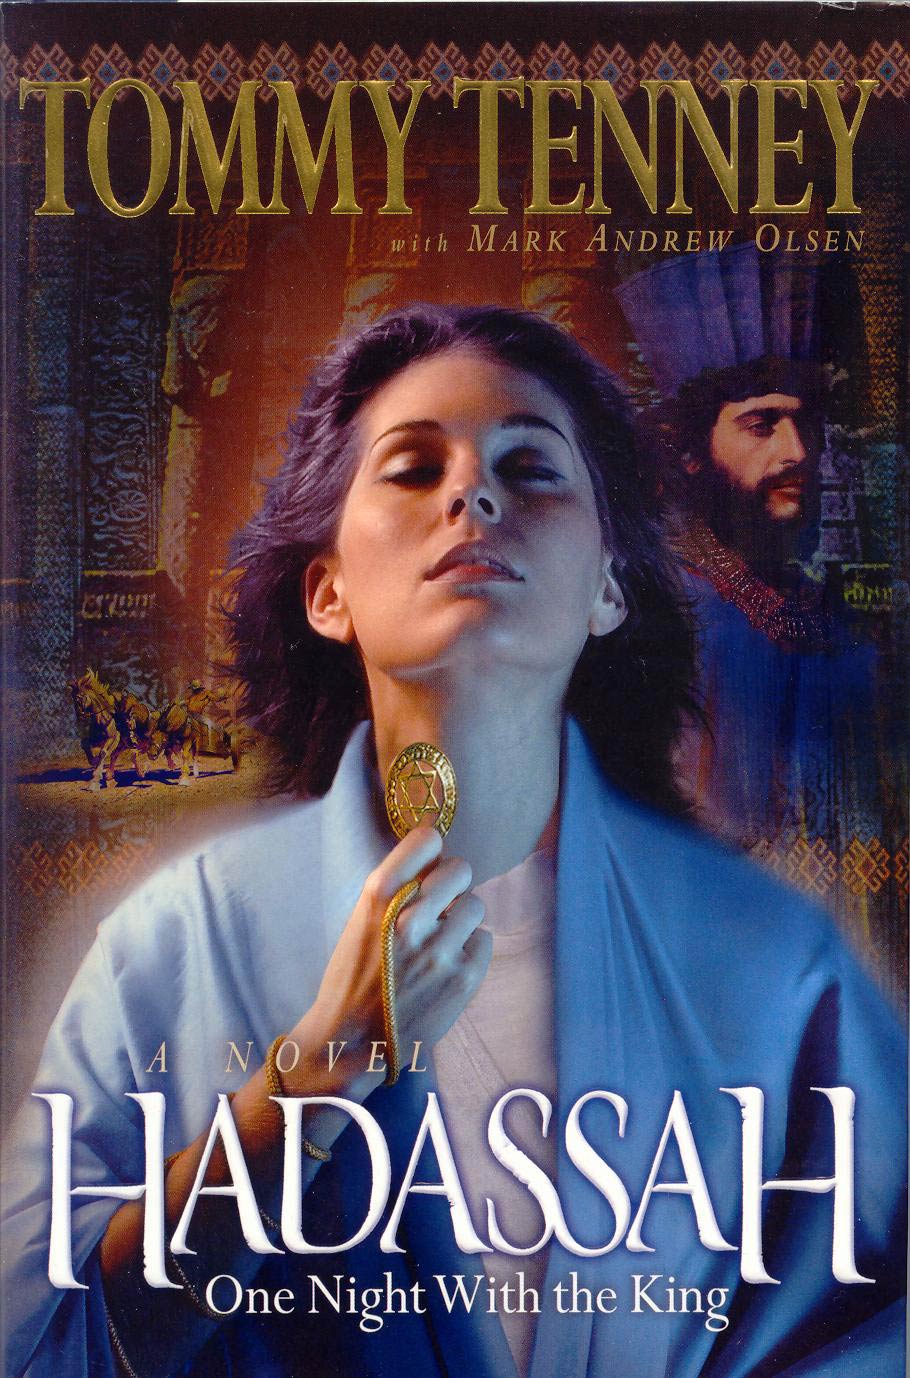 Hadassah, One Night with the King.